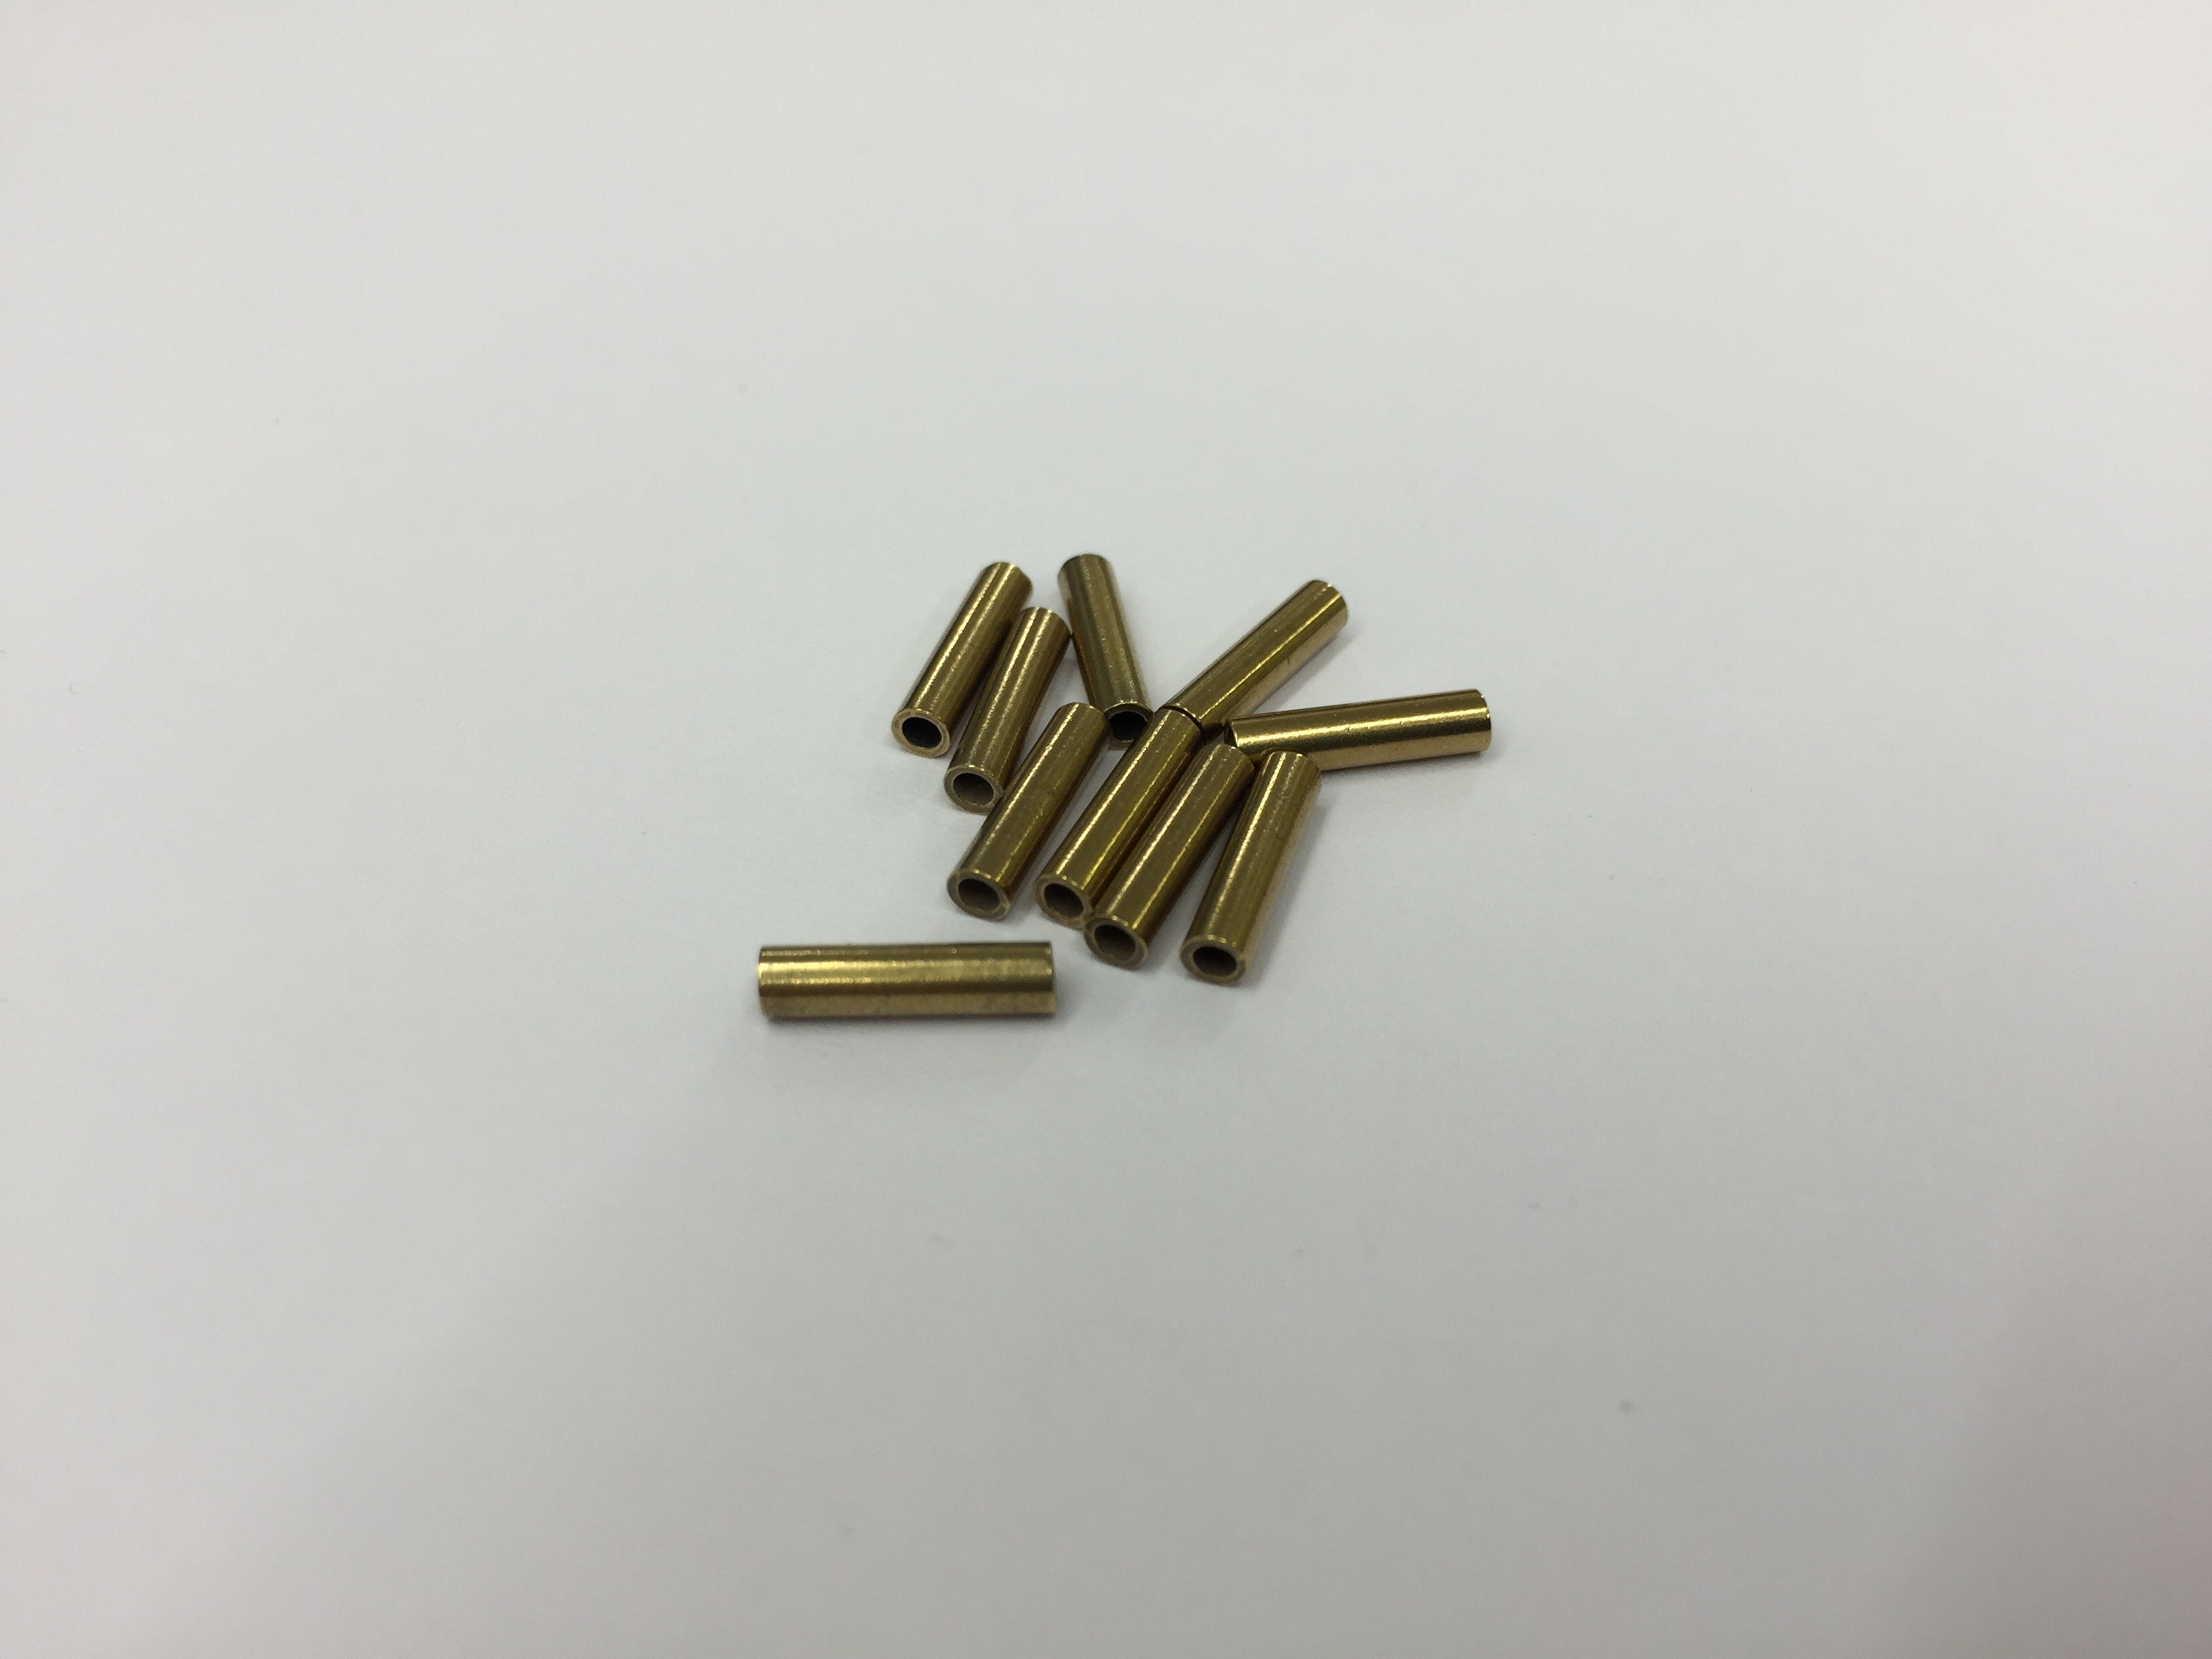 Closed Loop crimping Ferrule for 0.7mm Nylon trace wire - Brass 10 Pack